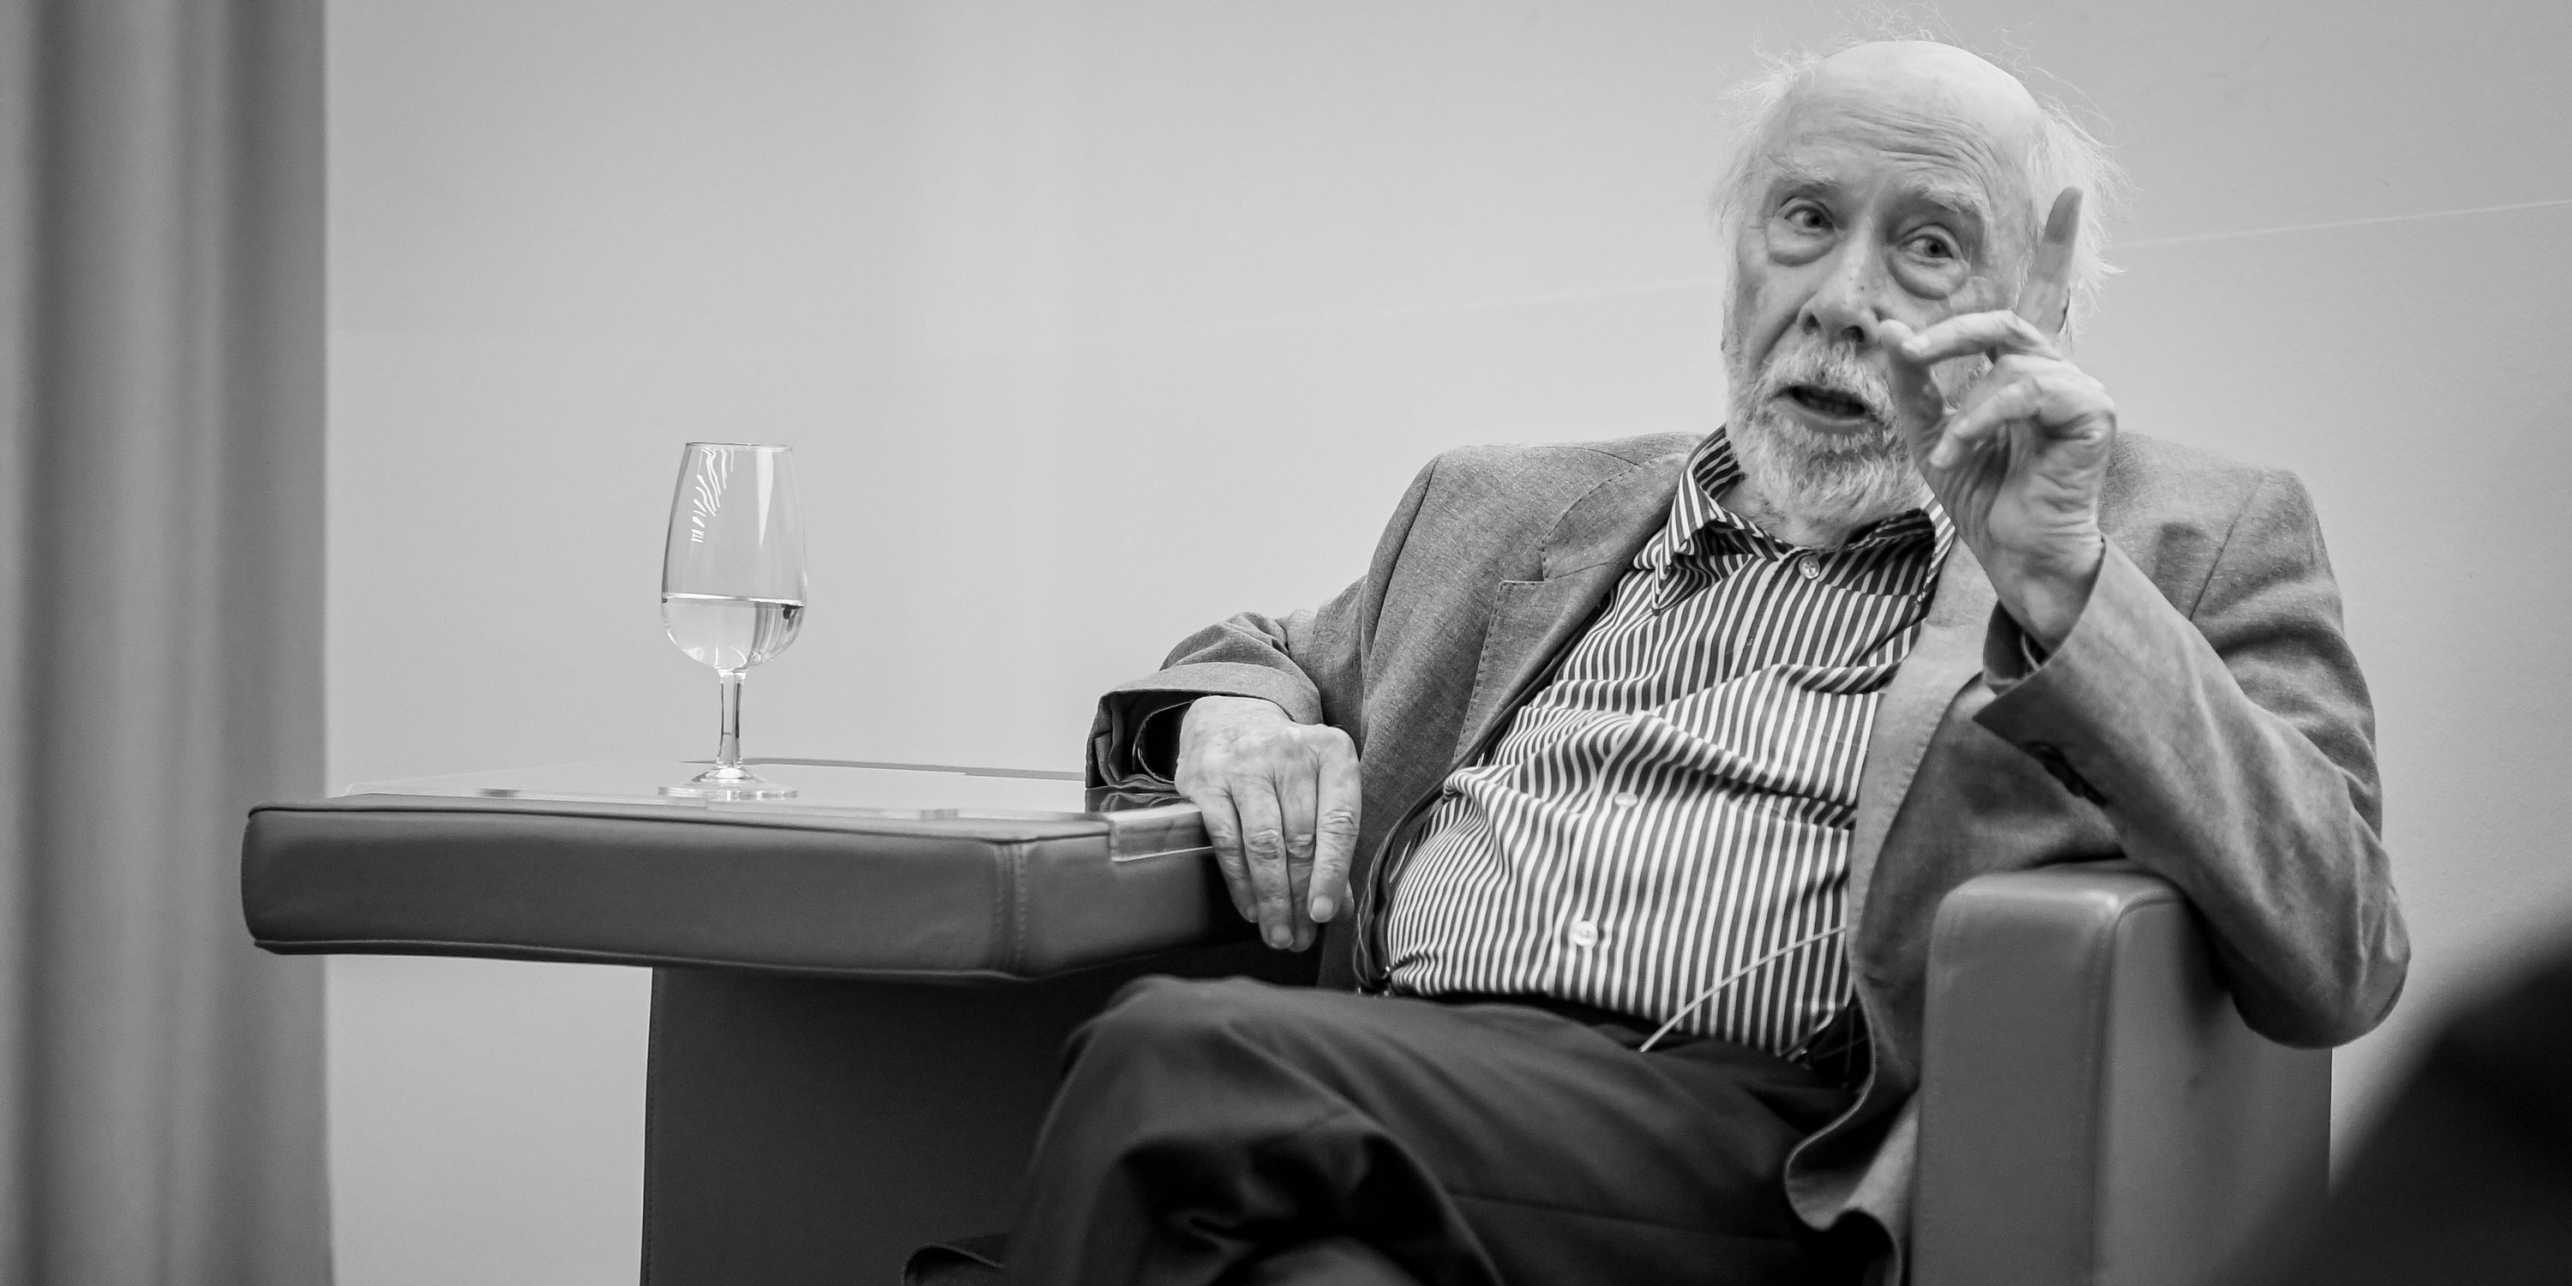 Niklaus Wirth was a Turing Award winner, computer pioneer, inventor of influential programming languages. He is probably best known for the programming language he developed, Pascal.